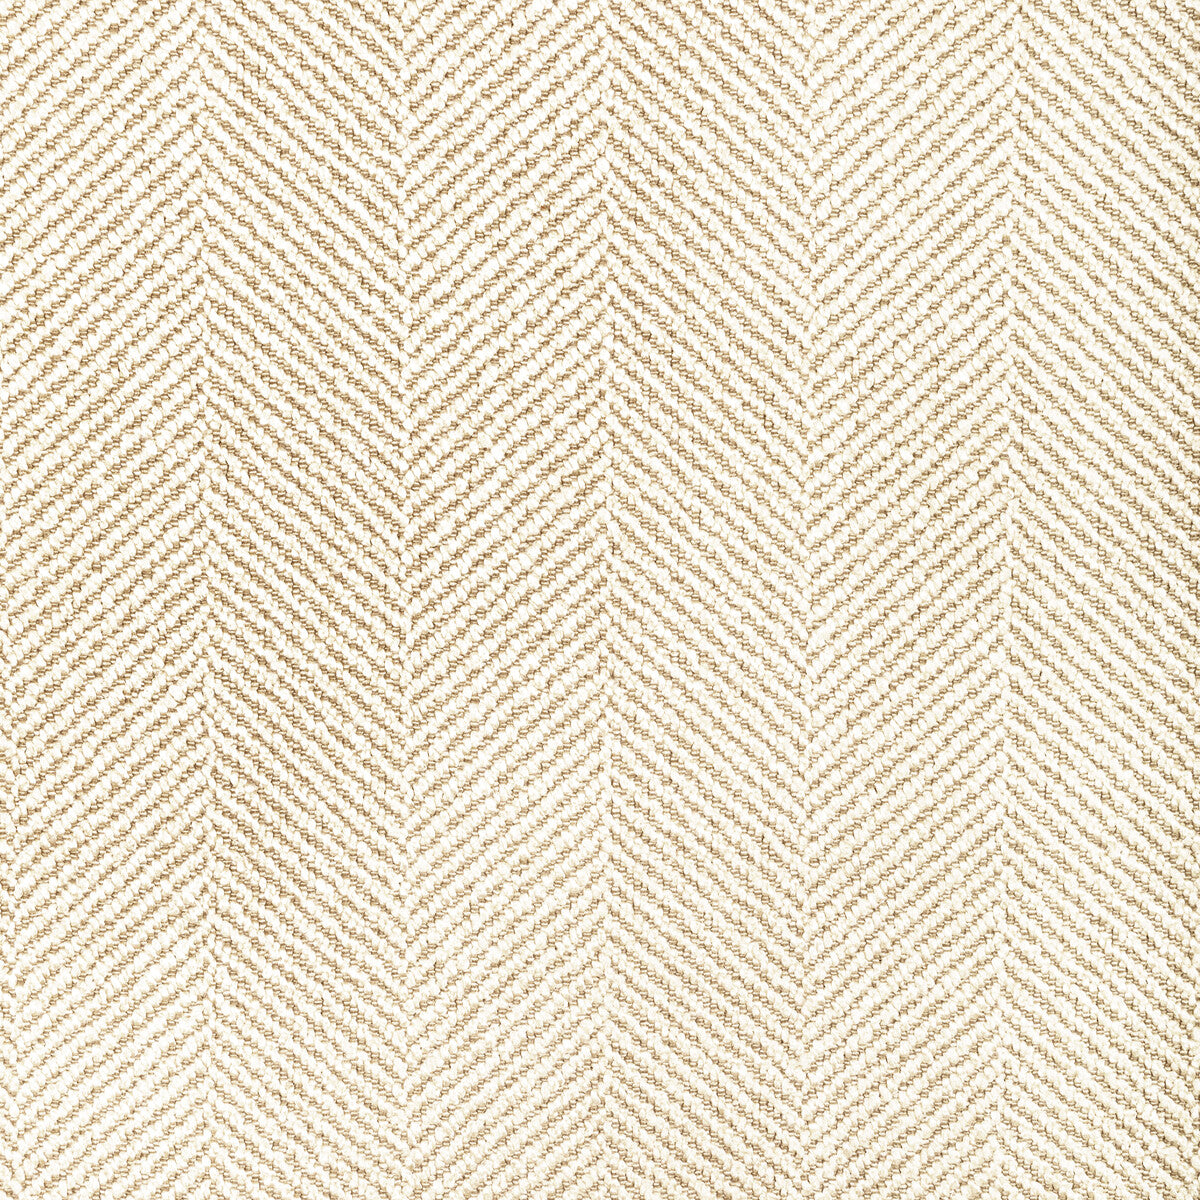 Kravet Smart fabric in 34631-116 color - pattern 34631.116.0 - by Kravet Smart in the Performance Crypton Home collection